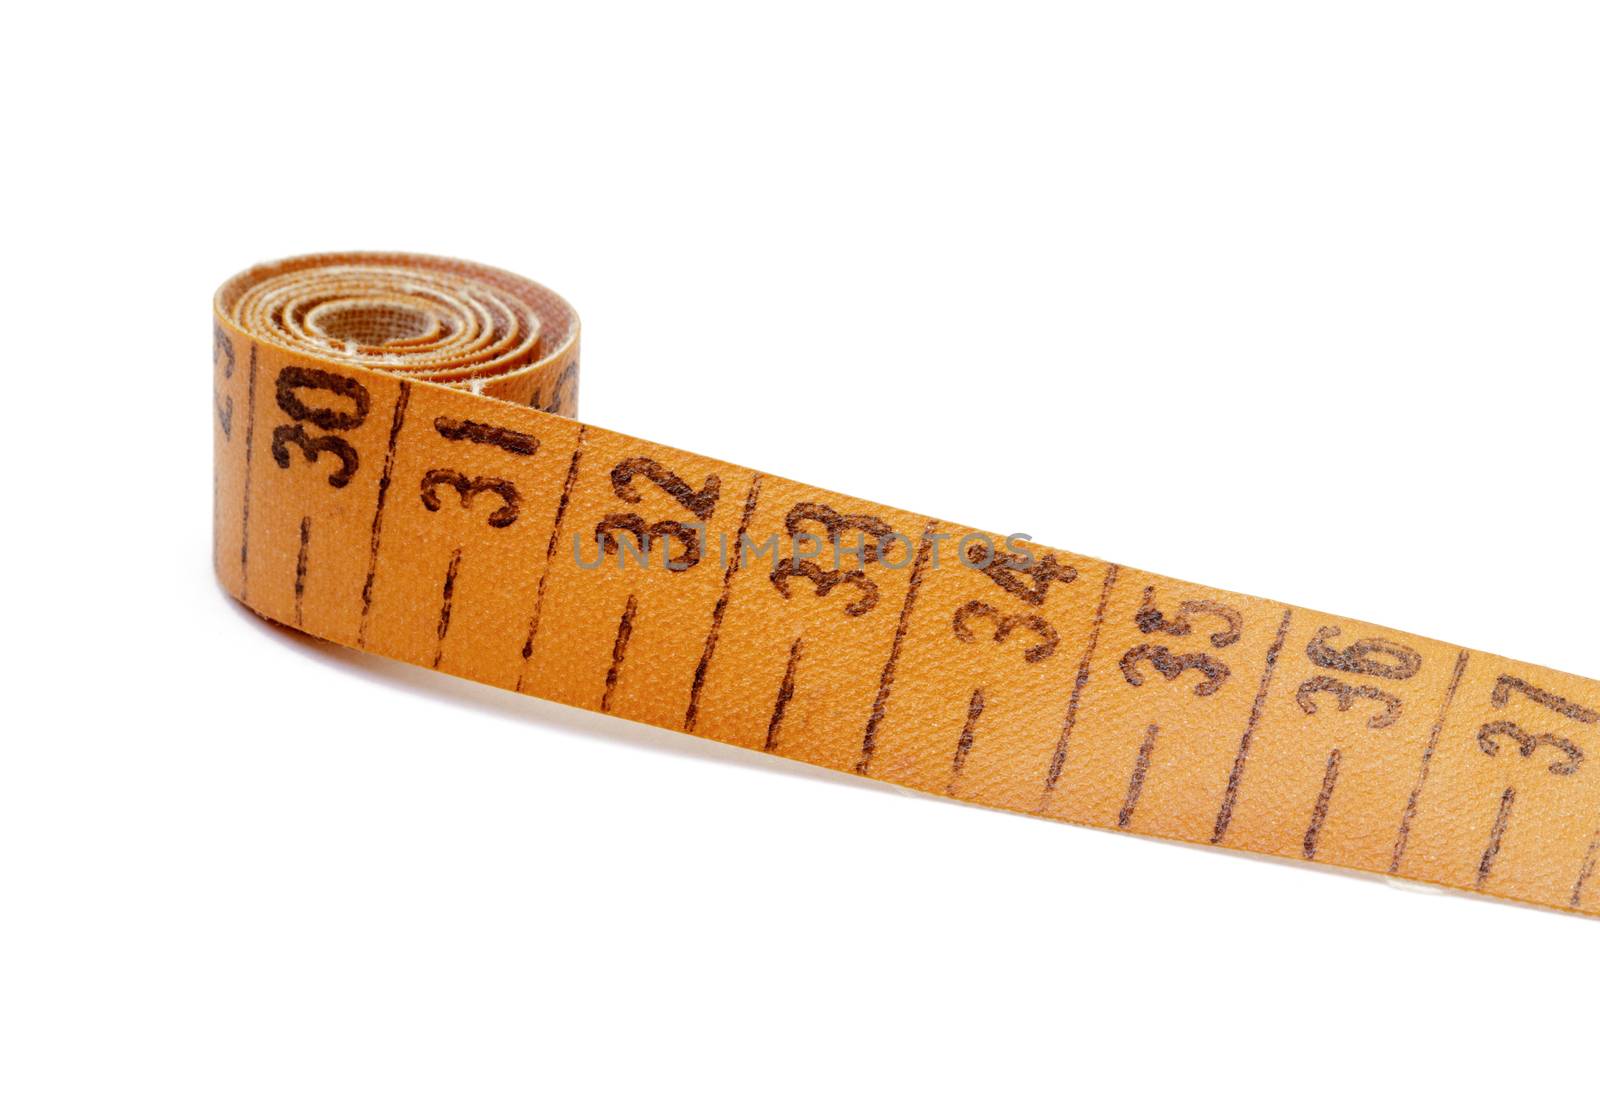 Measuring tape of the tailor by marslander